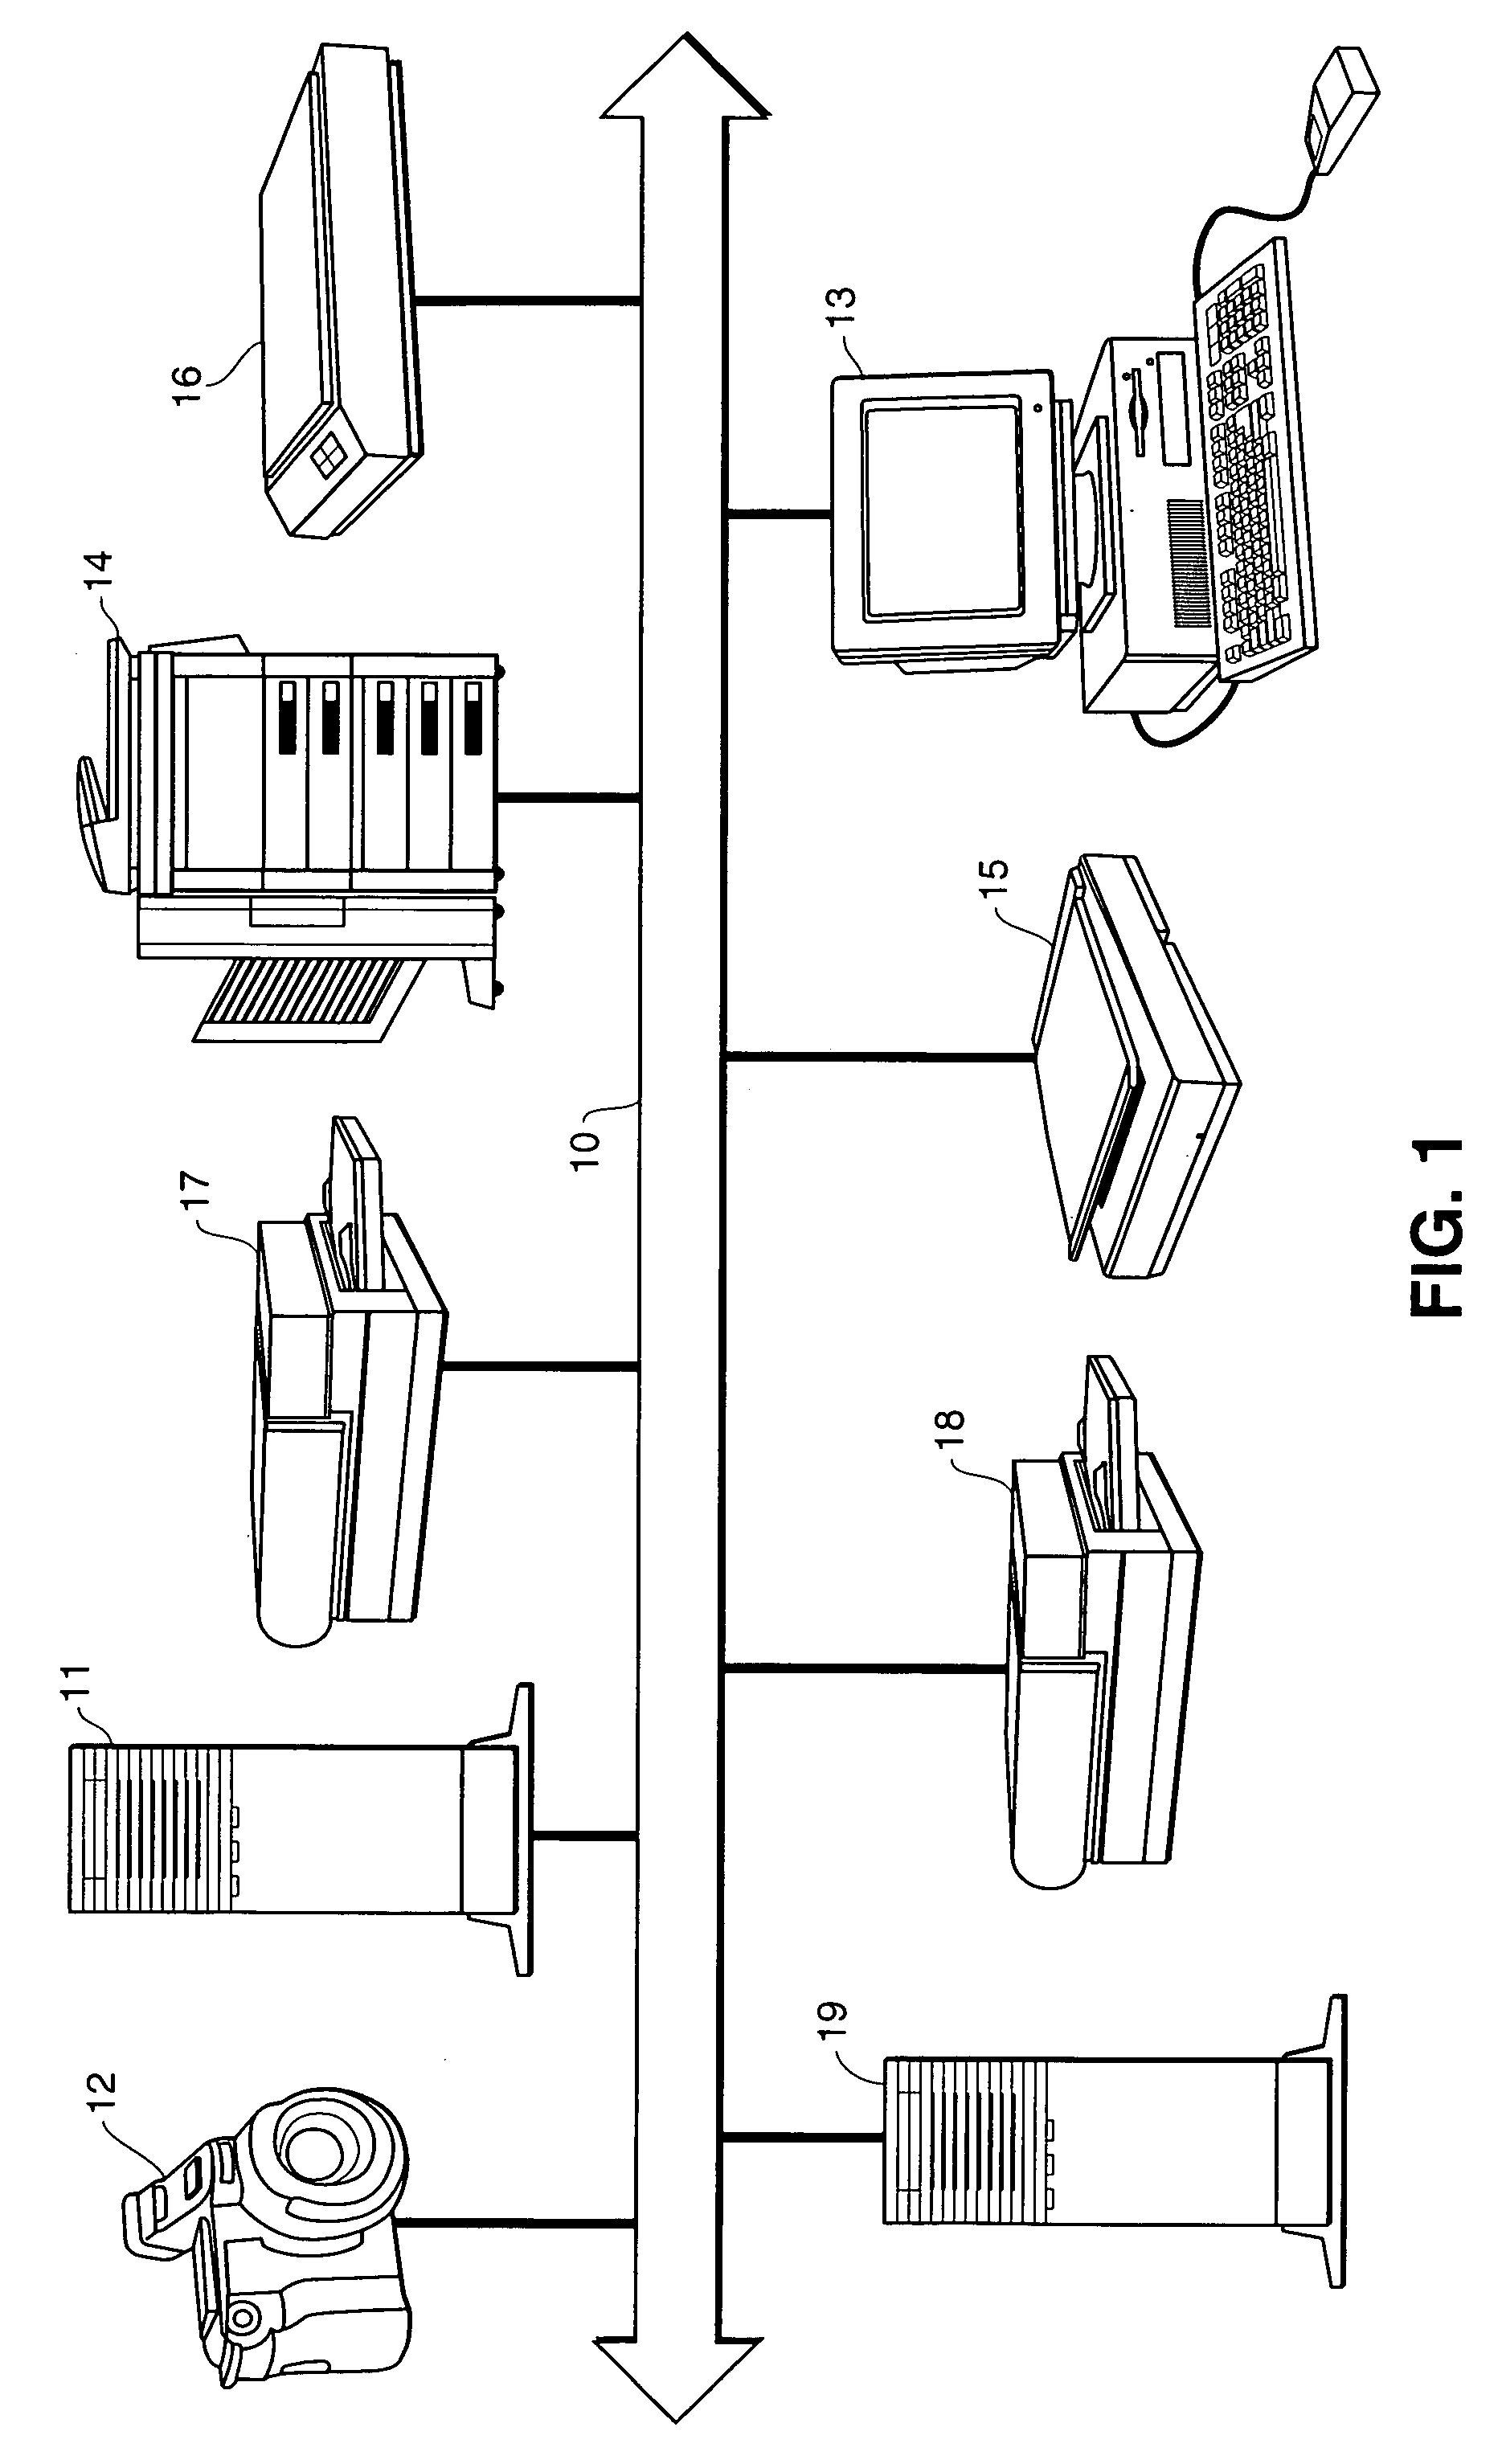 Object-based architecture for supporting network devices